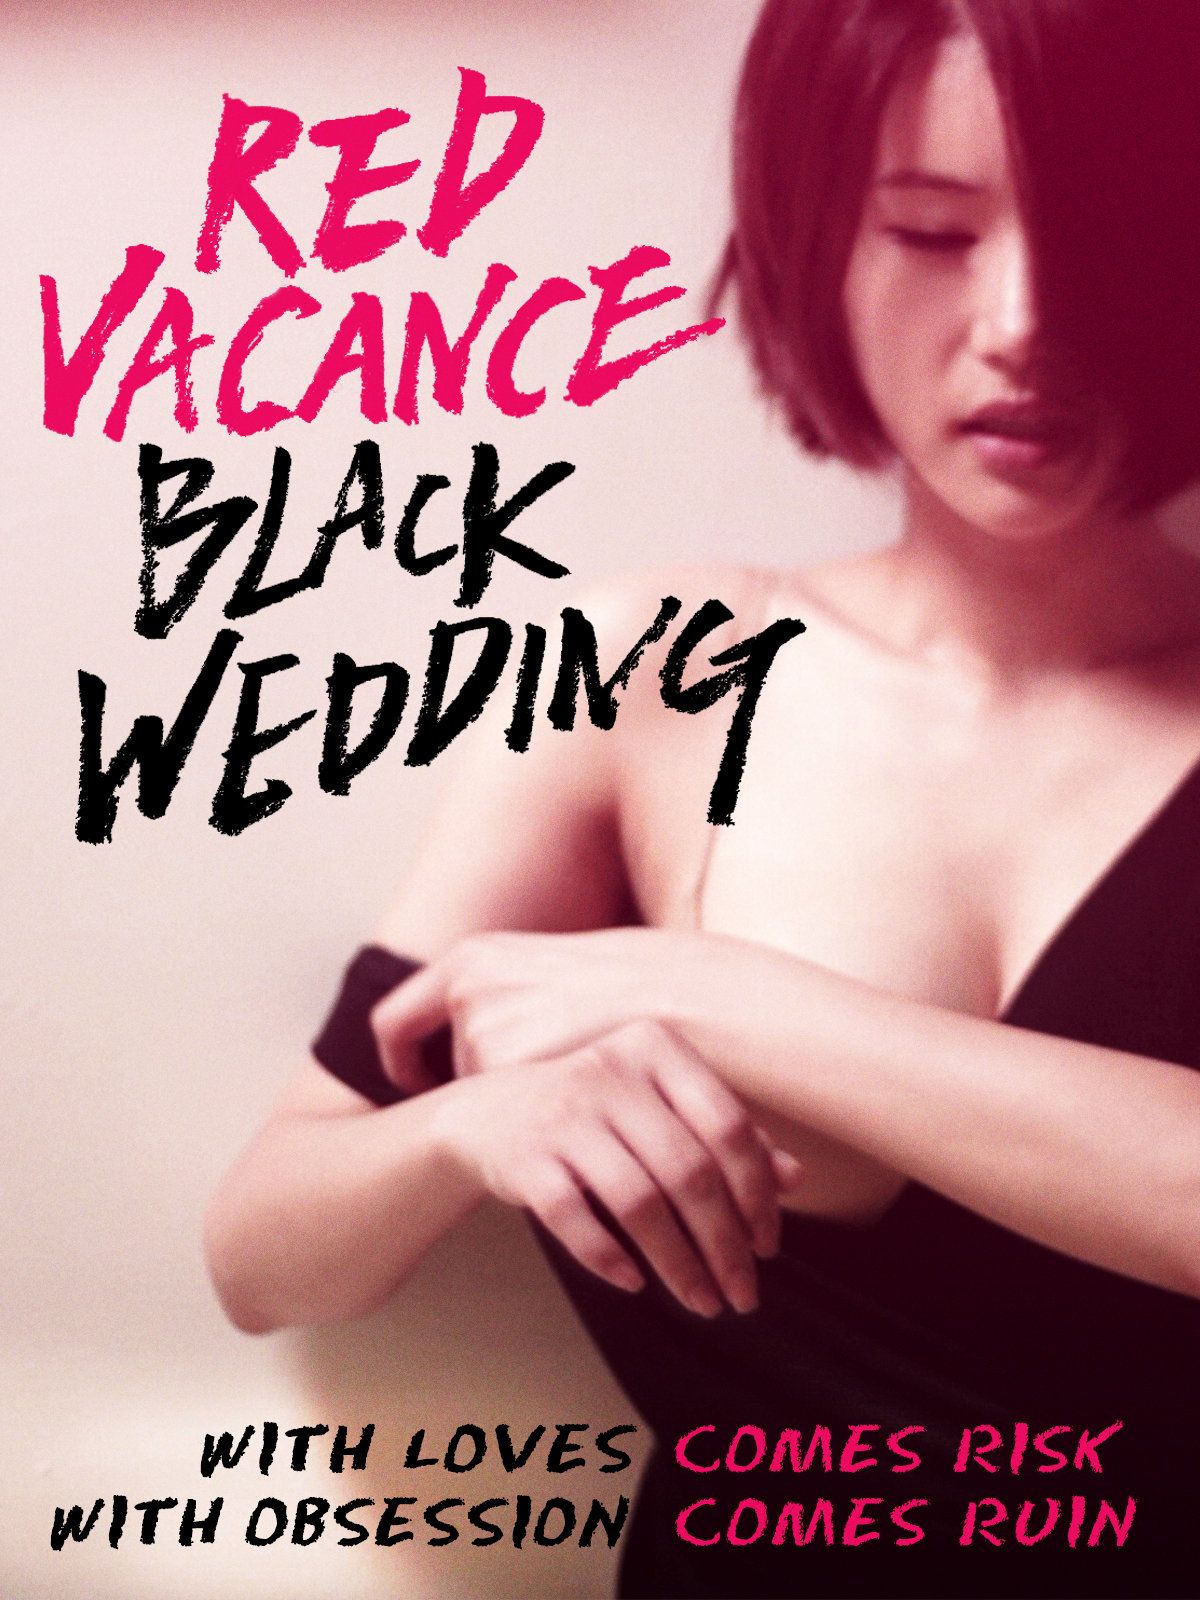 [18＋] Red Vacance Black Wedding (2011) Hindi (Voice Over) Dubbed download full movie